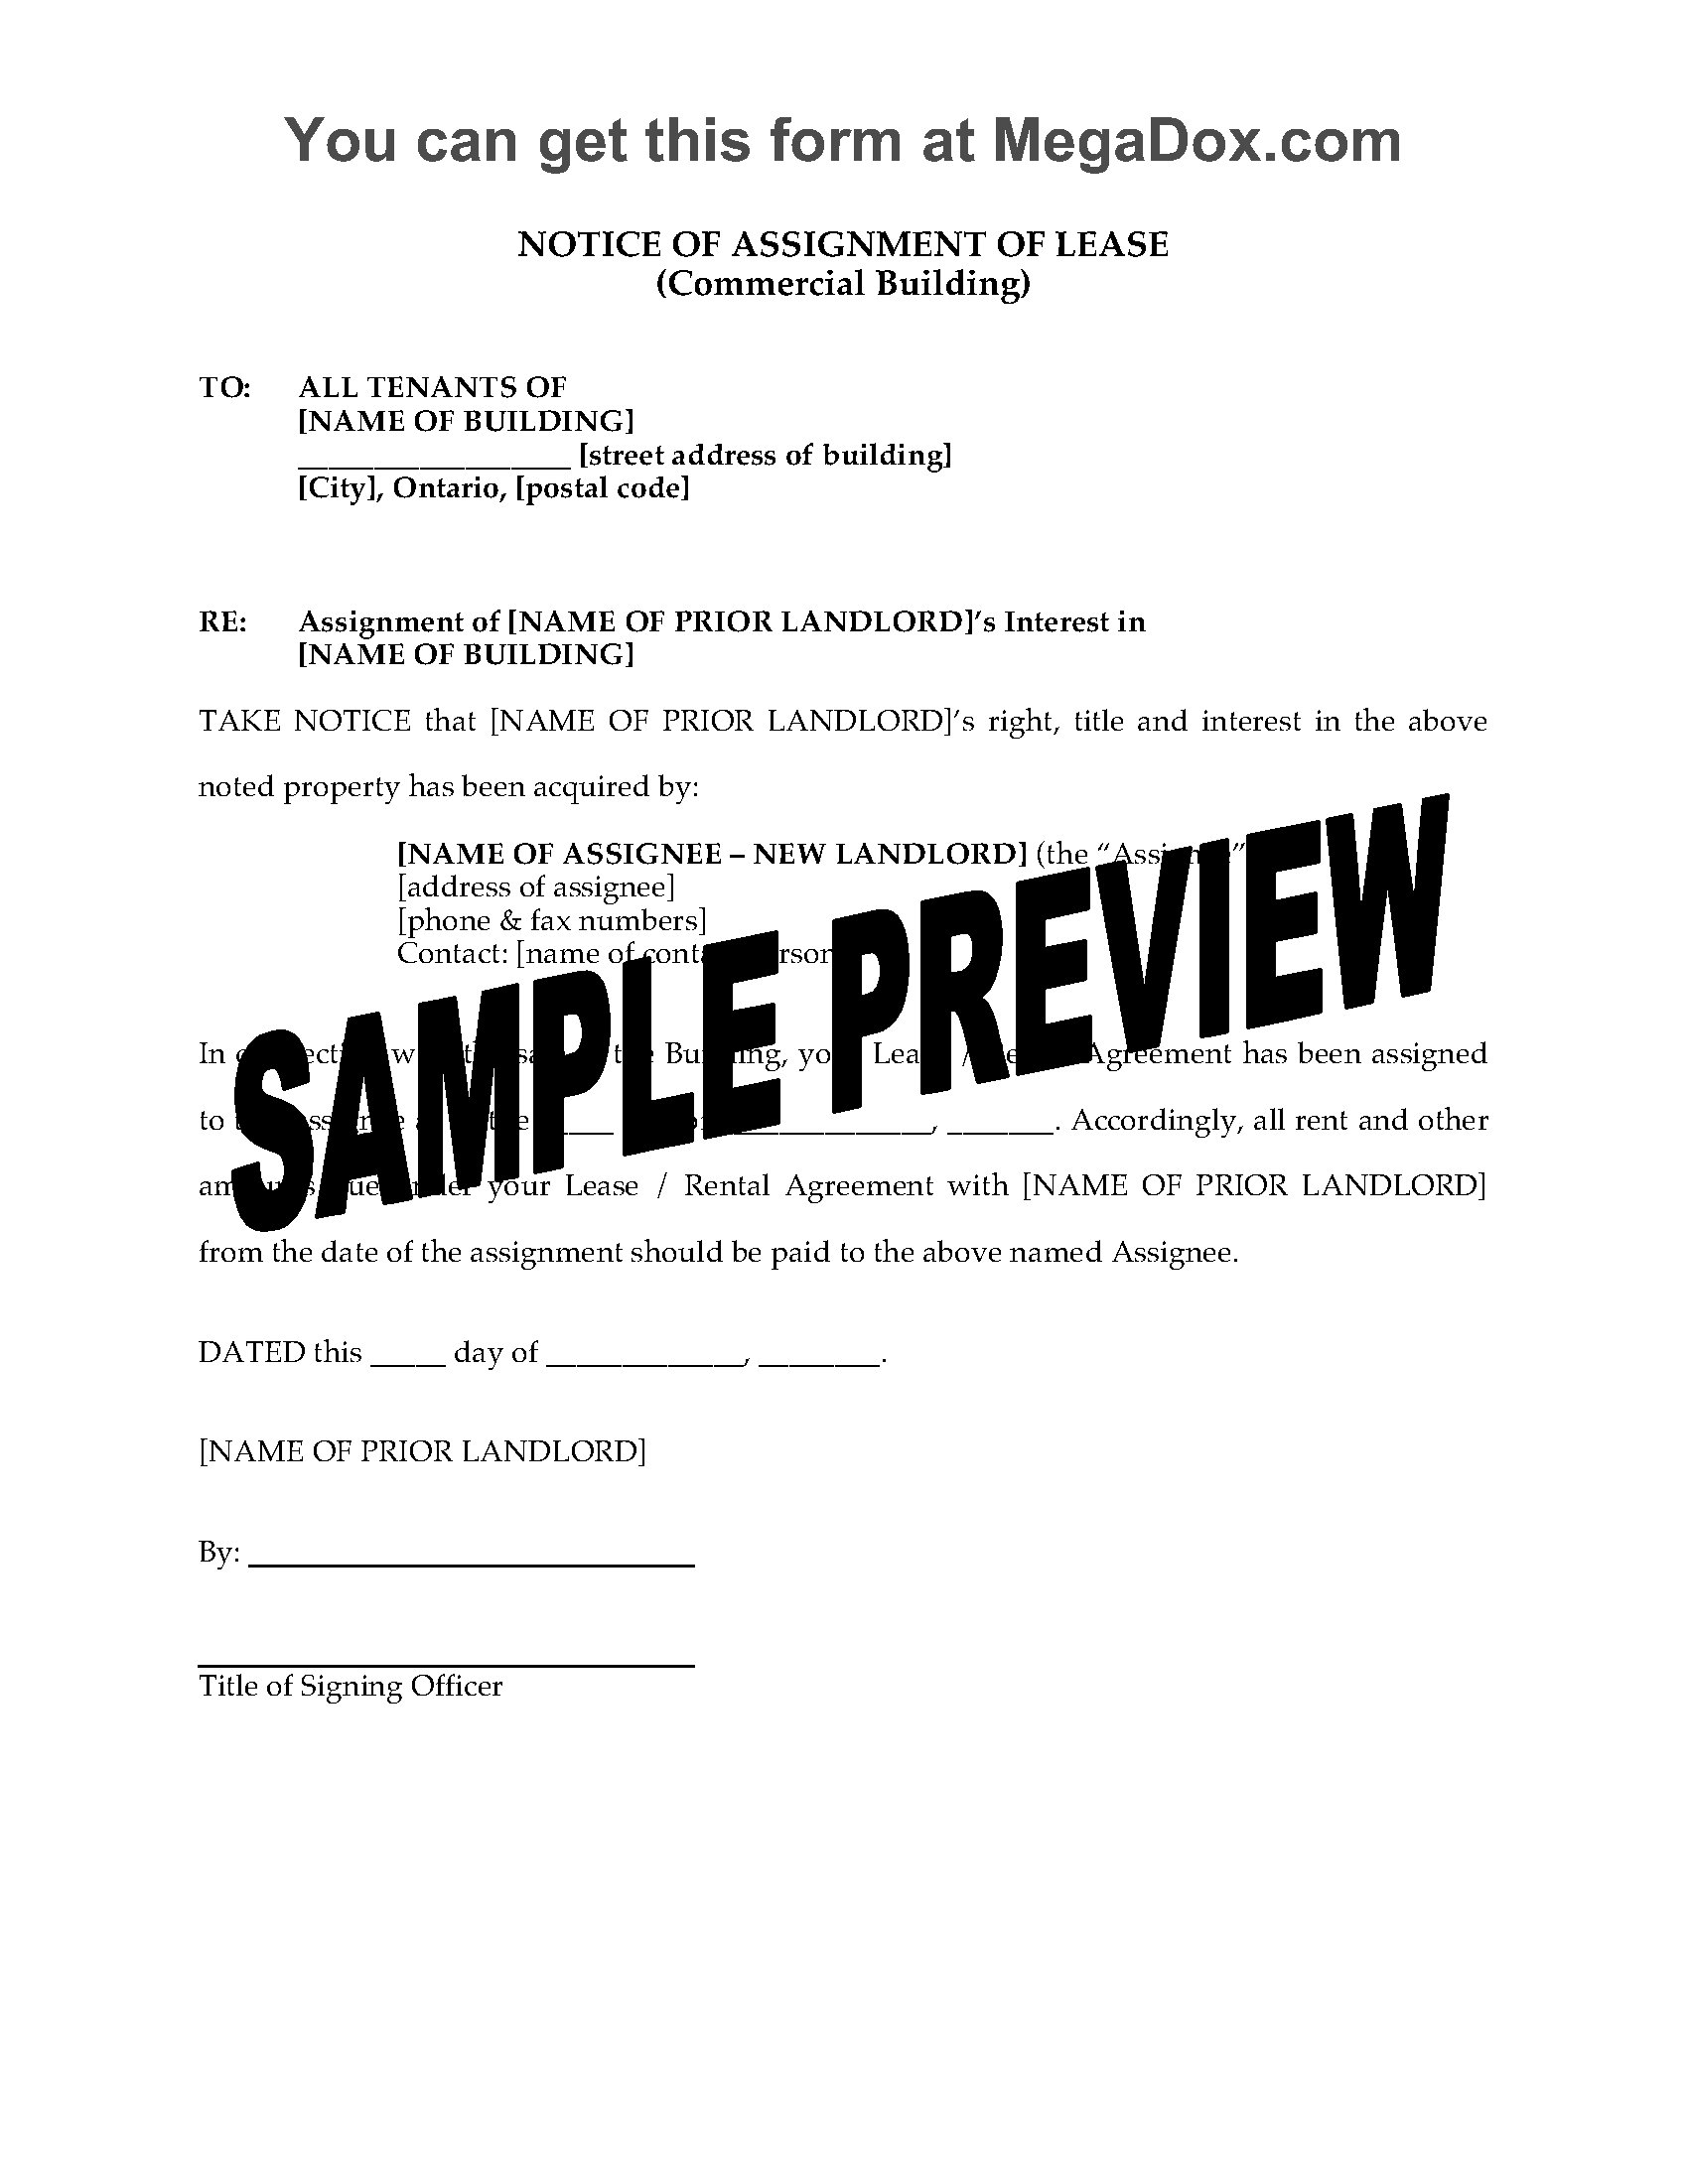 sample notice of assignment of lease